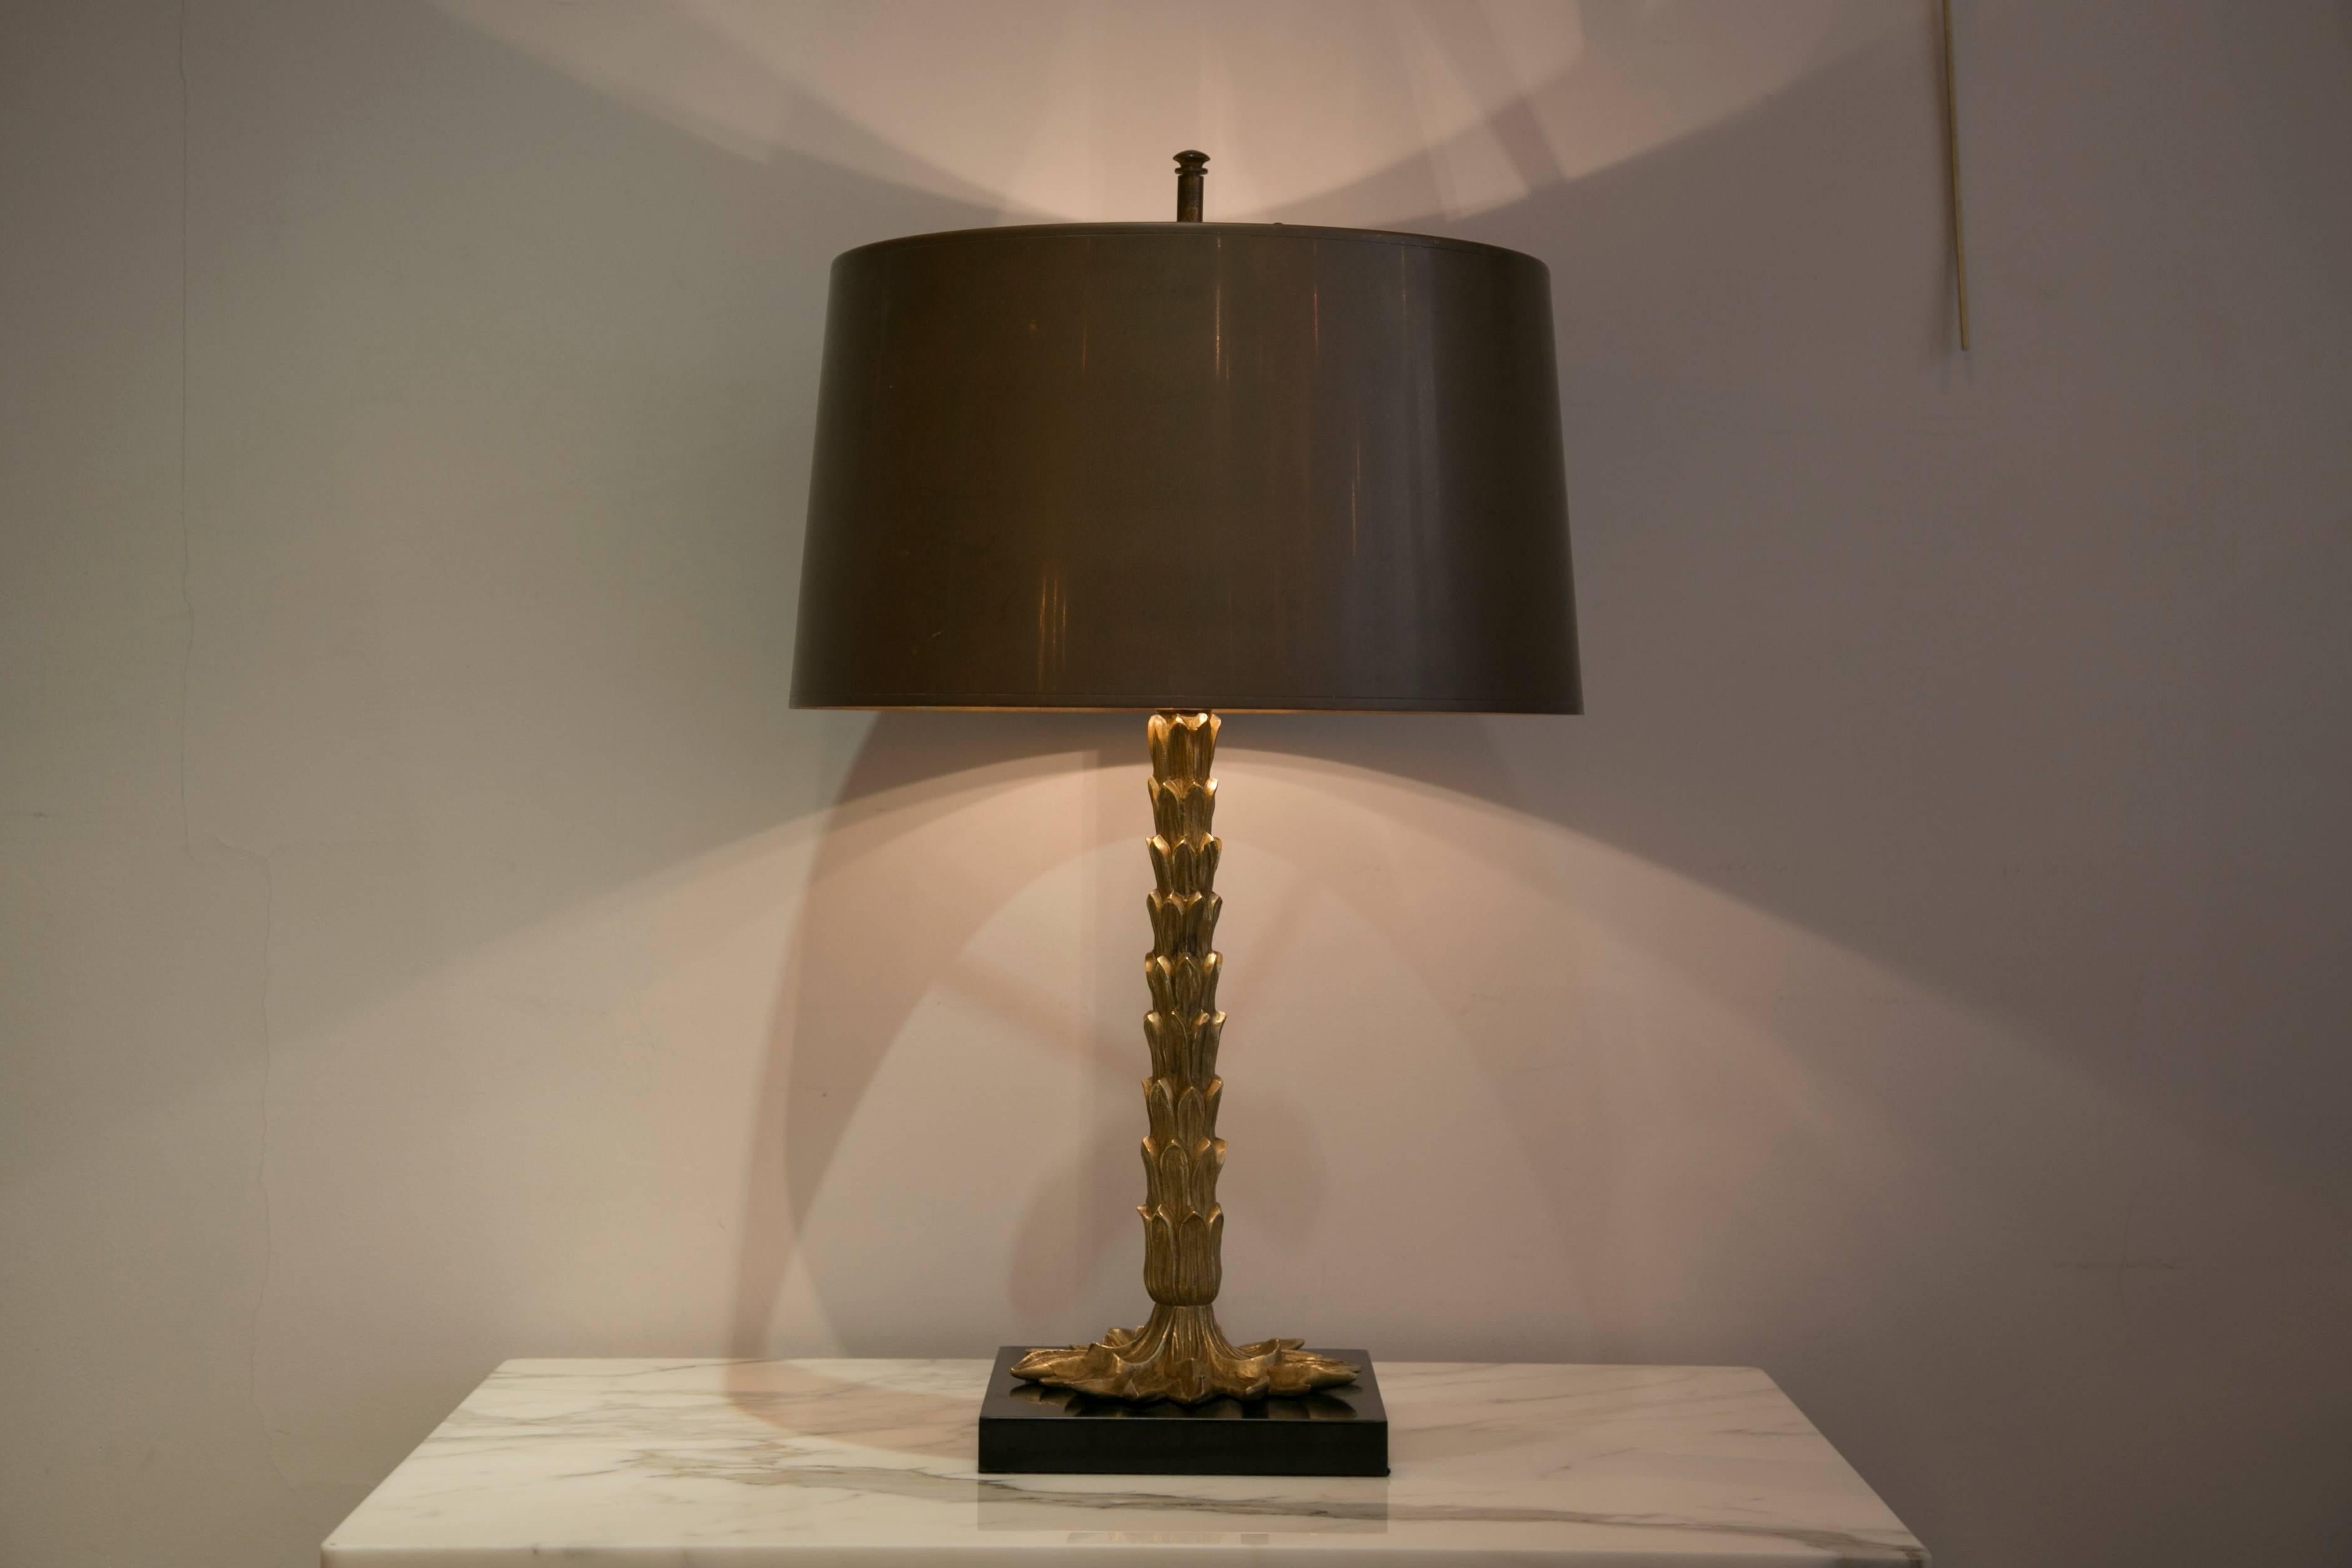 Bronze lamp on black marble base with a metal shade.
Model: Palme
Design by Jean Charles
Manufactured by Maison Charles and fils
France, 1950s.